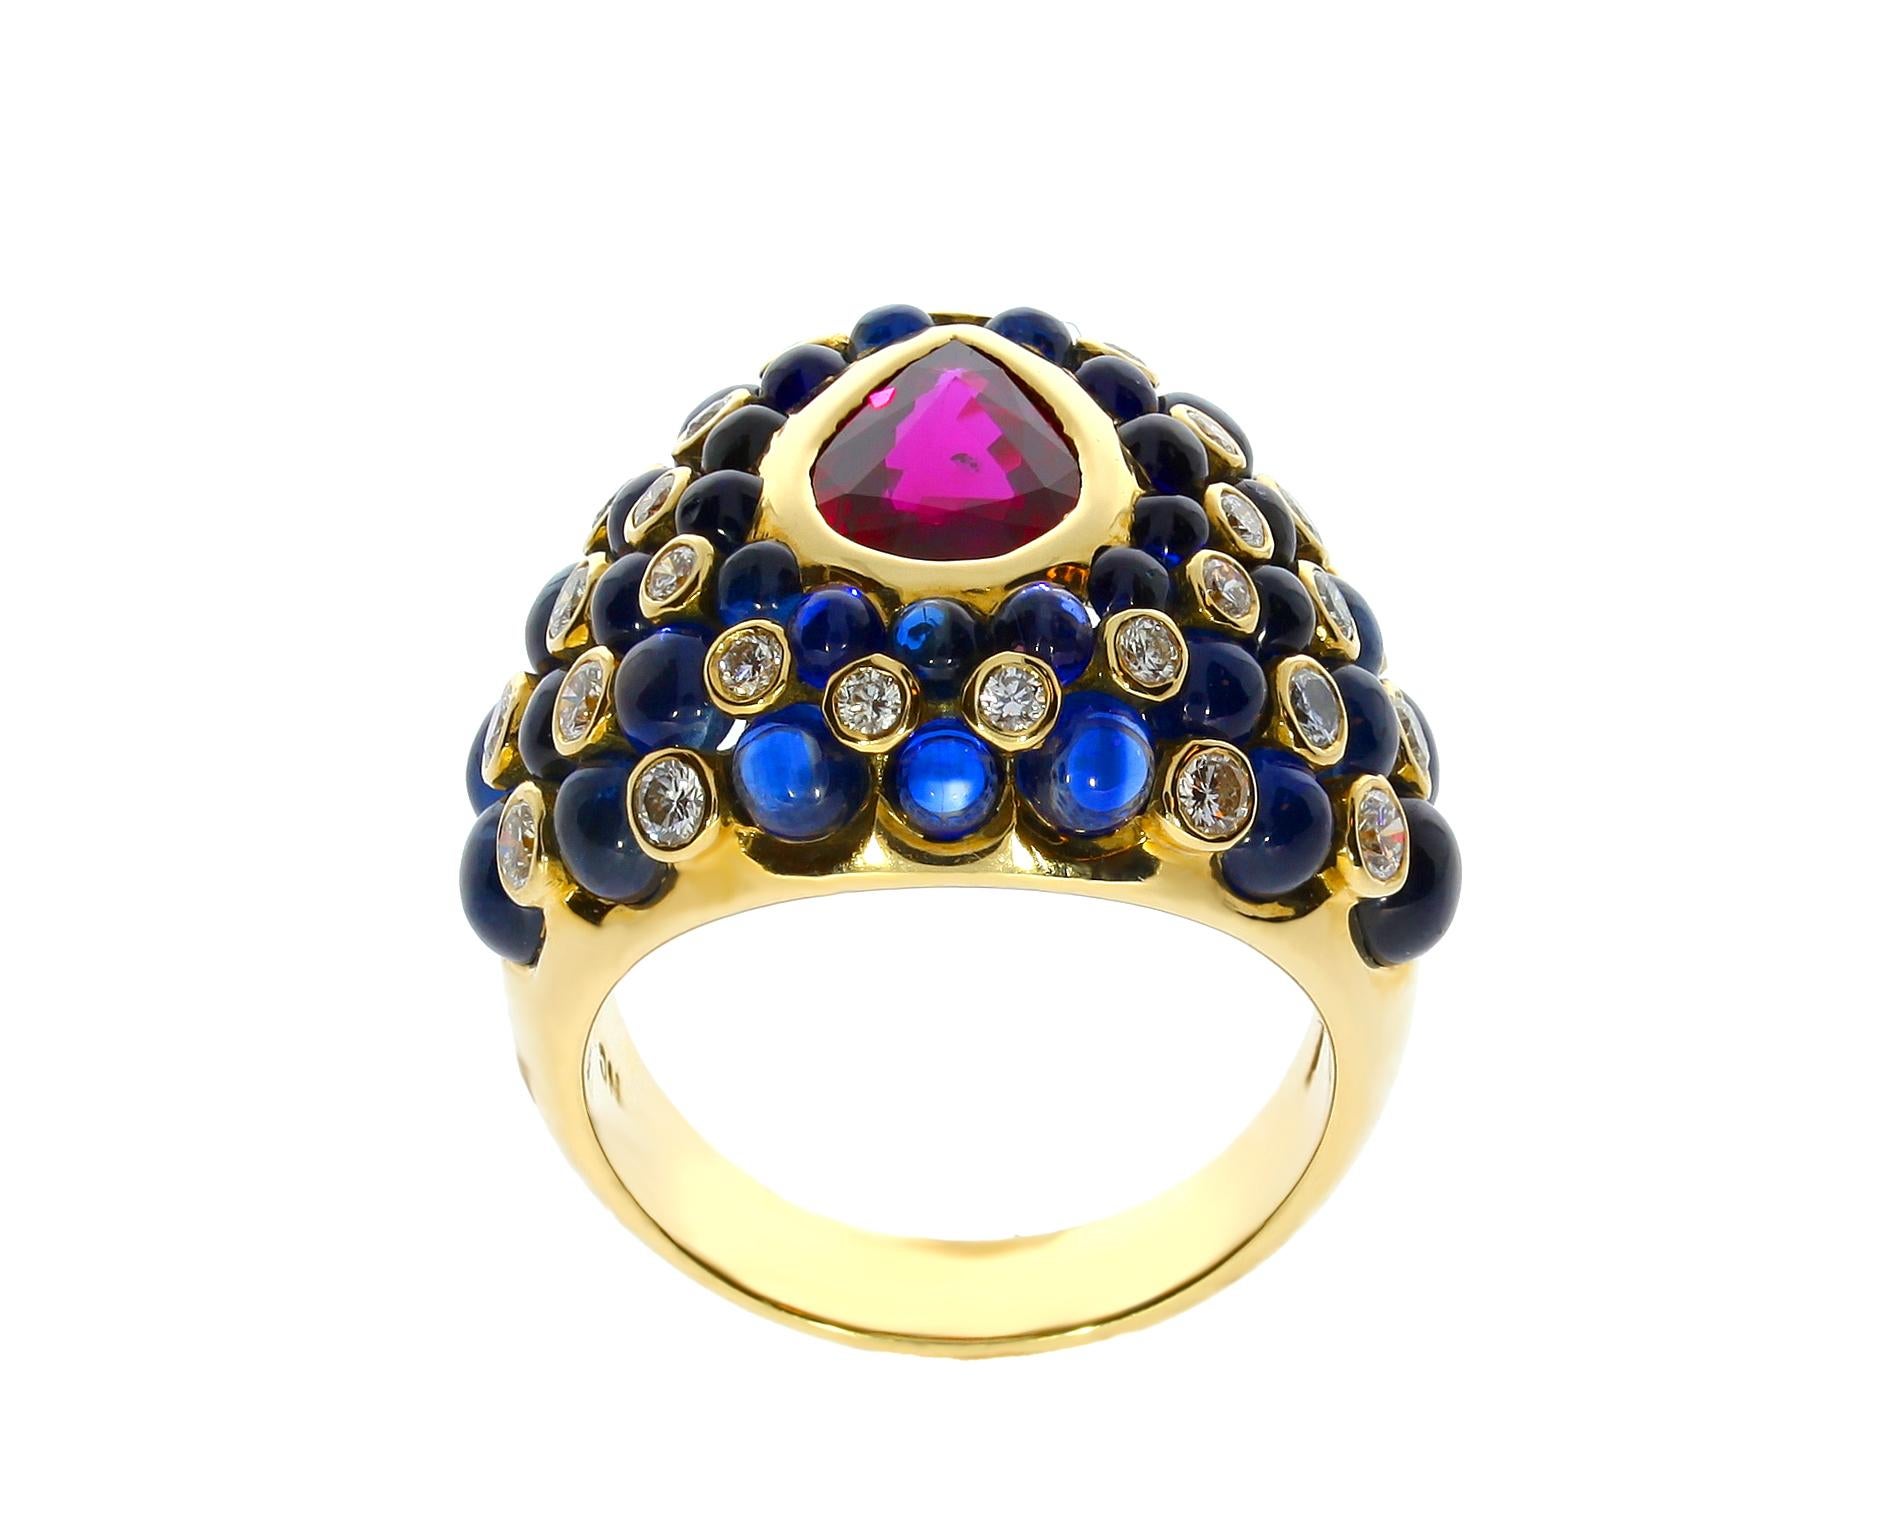 This Chatila 18 carat yellow gold ruby cocktail ring with circular diamond and blue sapphire accents is perfect for any occasion.

Details:

- 32 Diamonds with a total weight of 0.79 carats.
- 1 Ruby with a total weight of 1.46 carats.
- 38